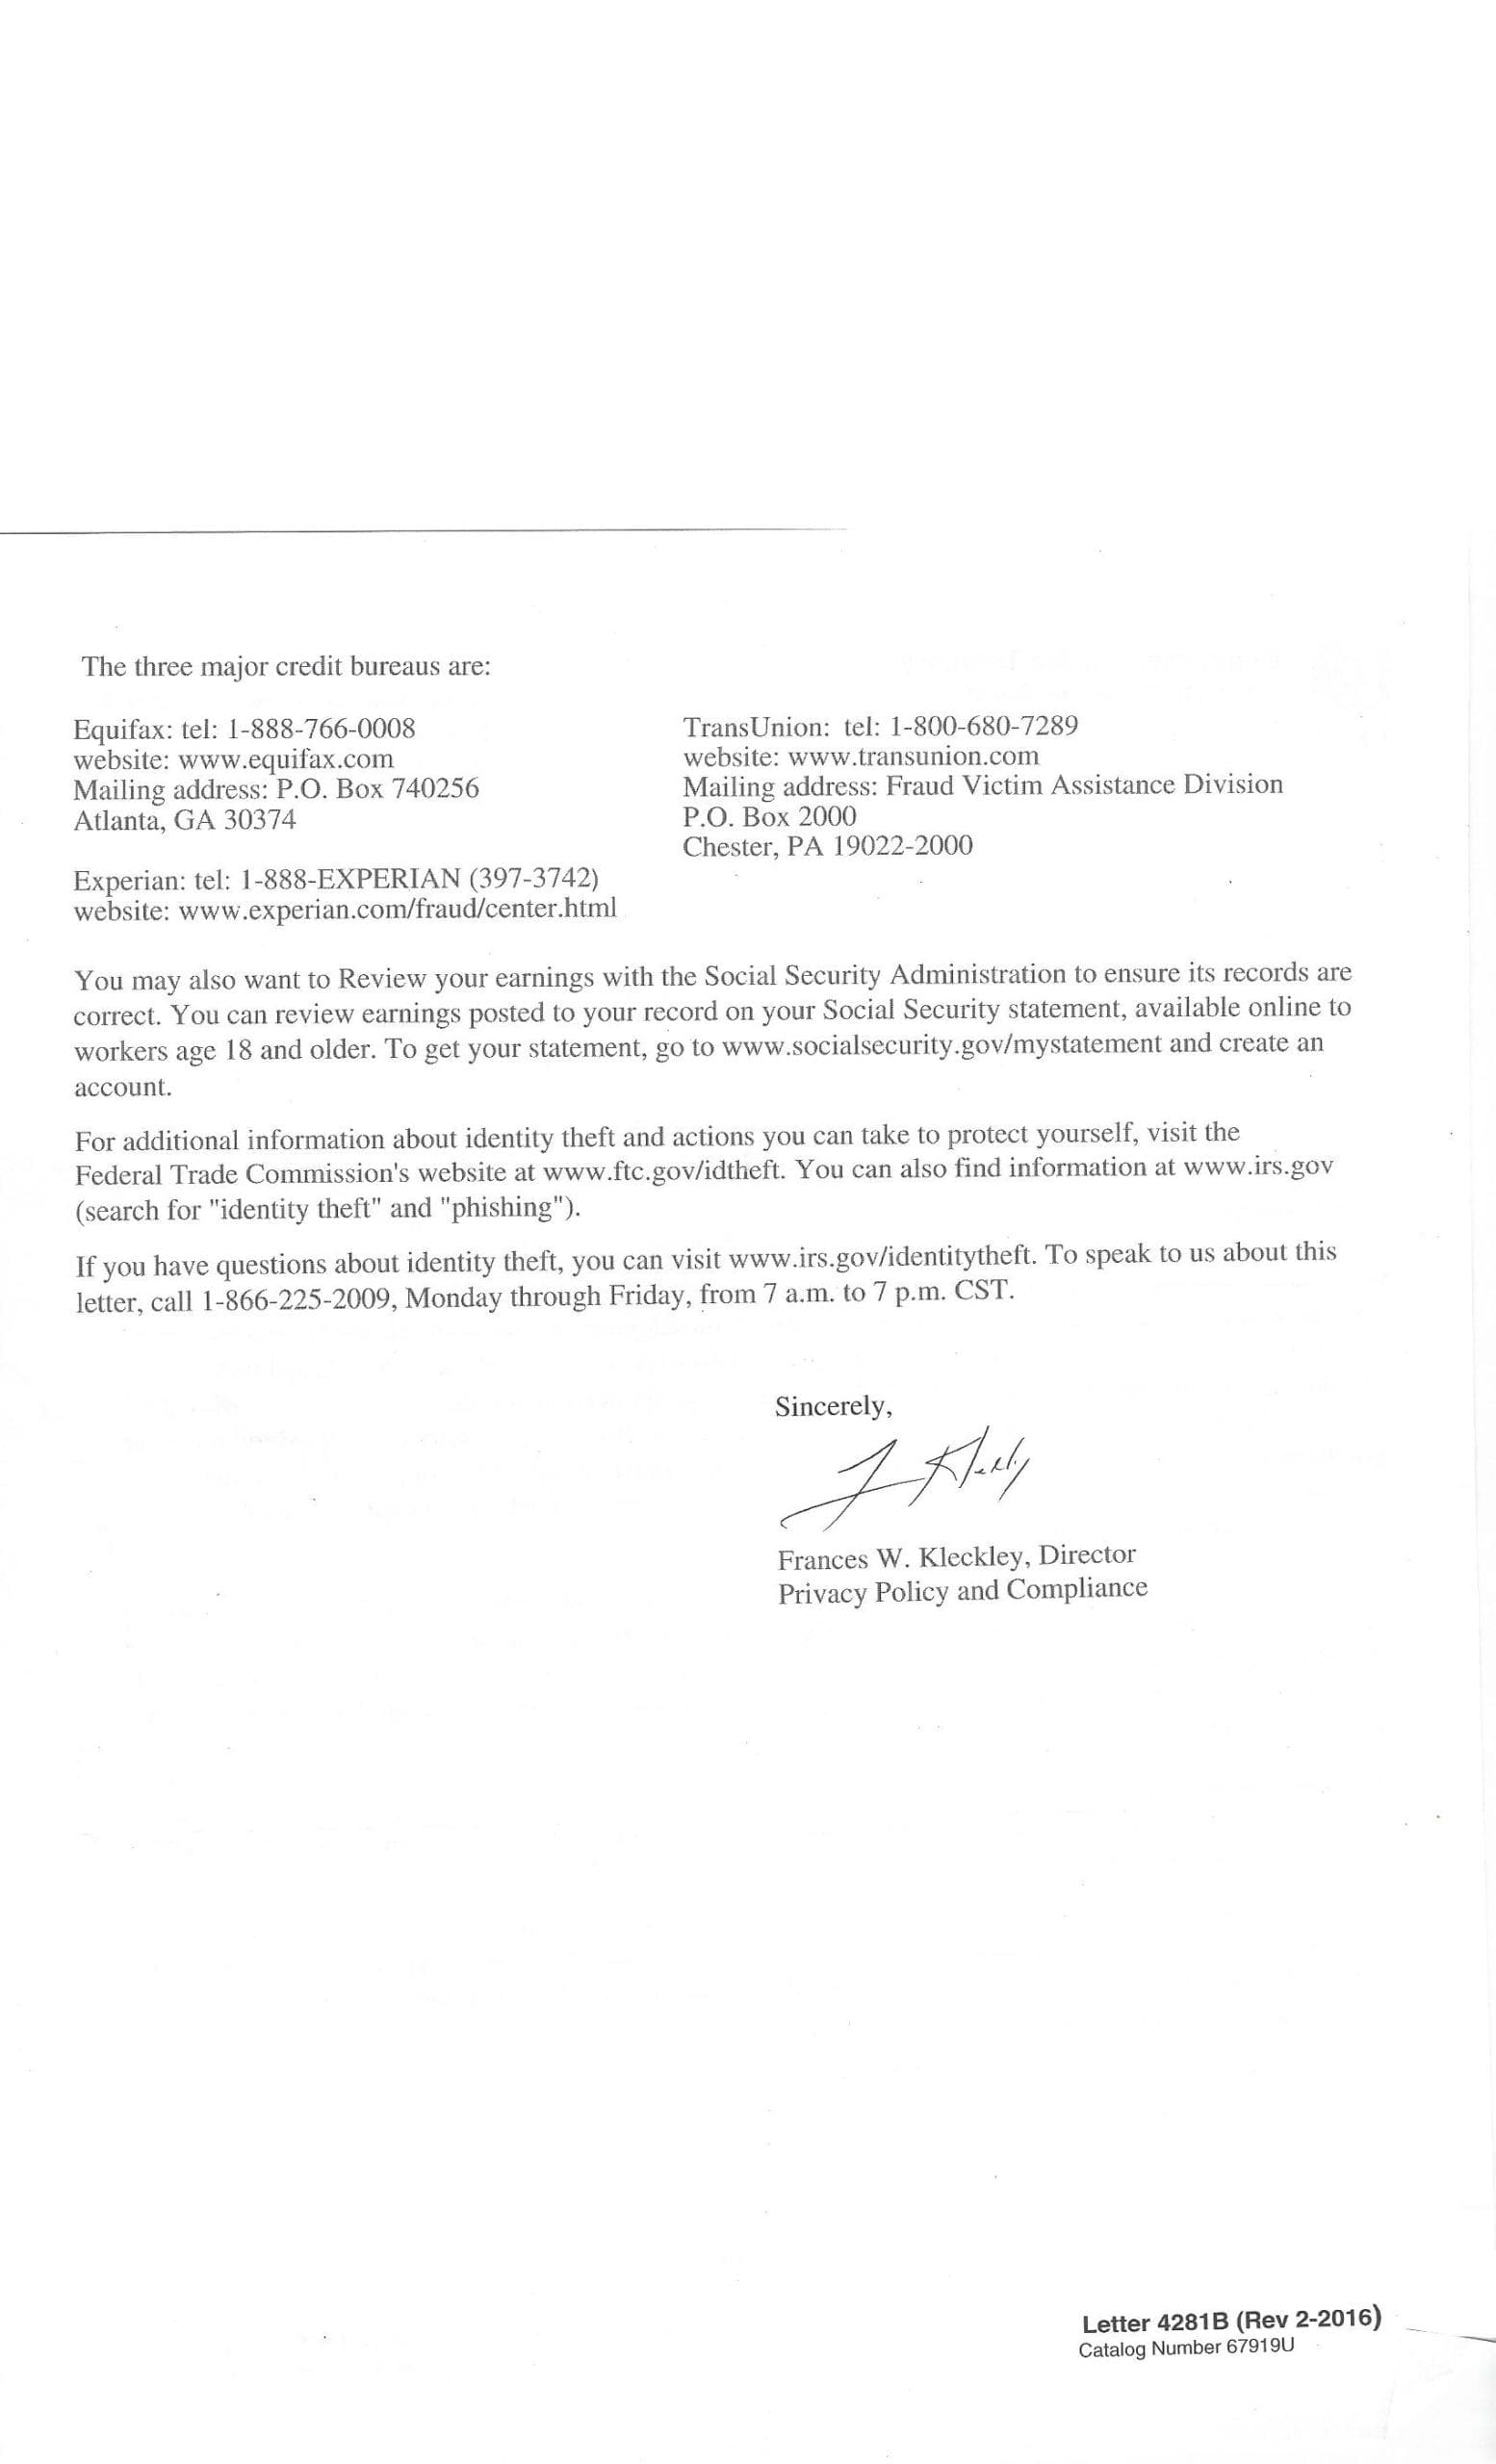 IRS letter warns of possible privacy issues - SC Small Business Chamber of Commerce1700 x 2800